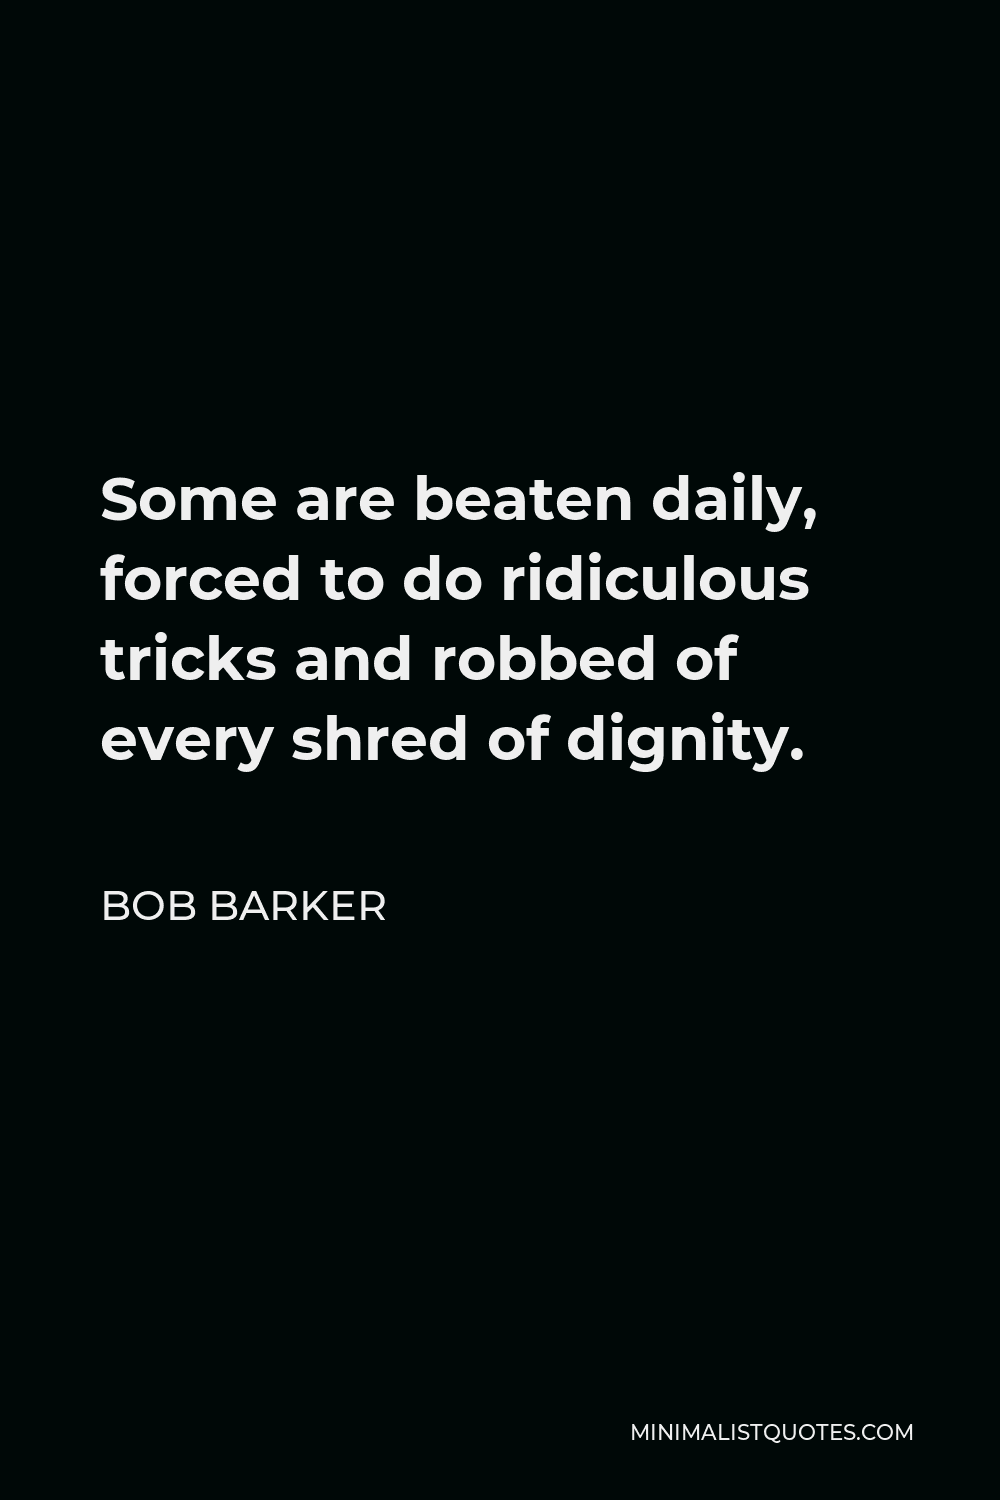 Bob Barker Quote - Some are beaten daily, forced to do ridiculous tricks and robbed of every shred of dignity.